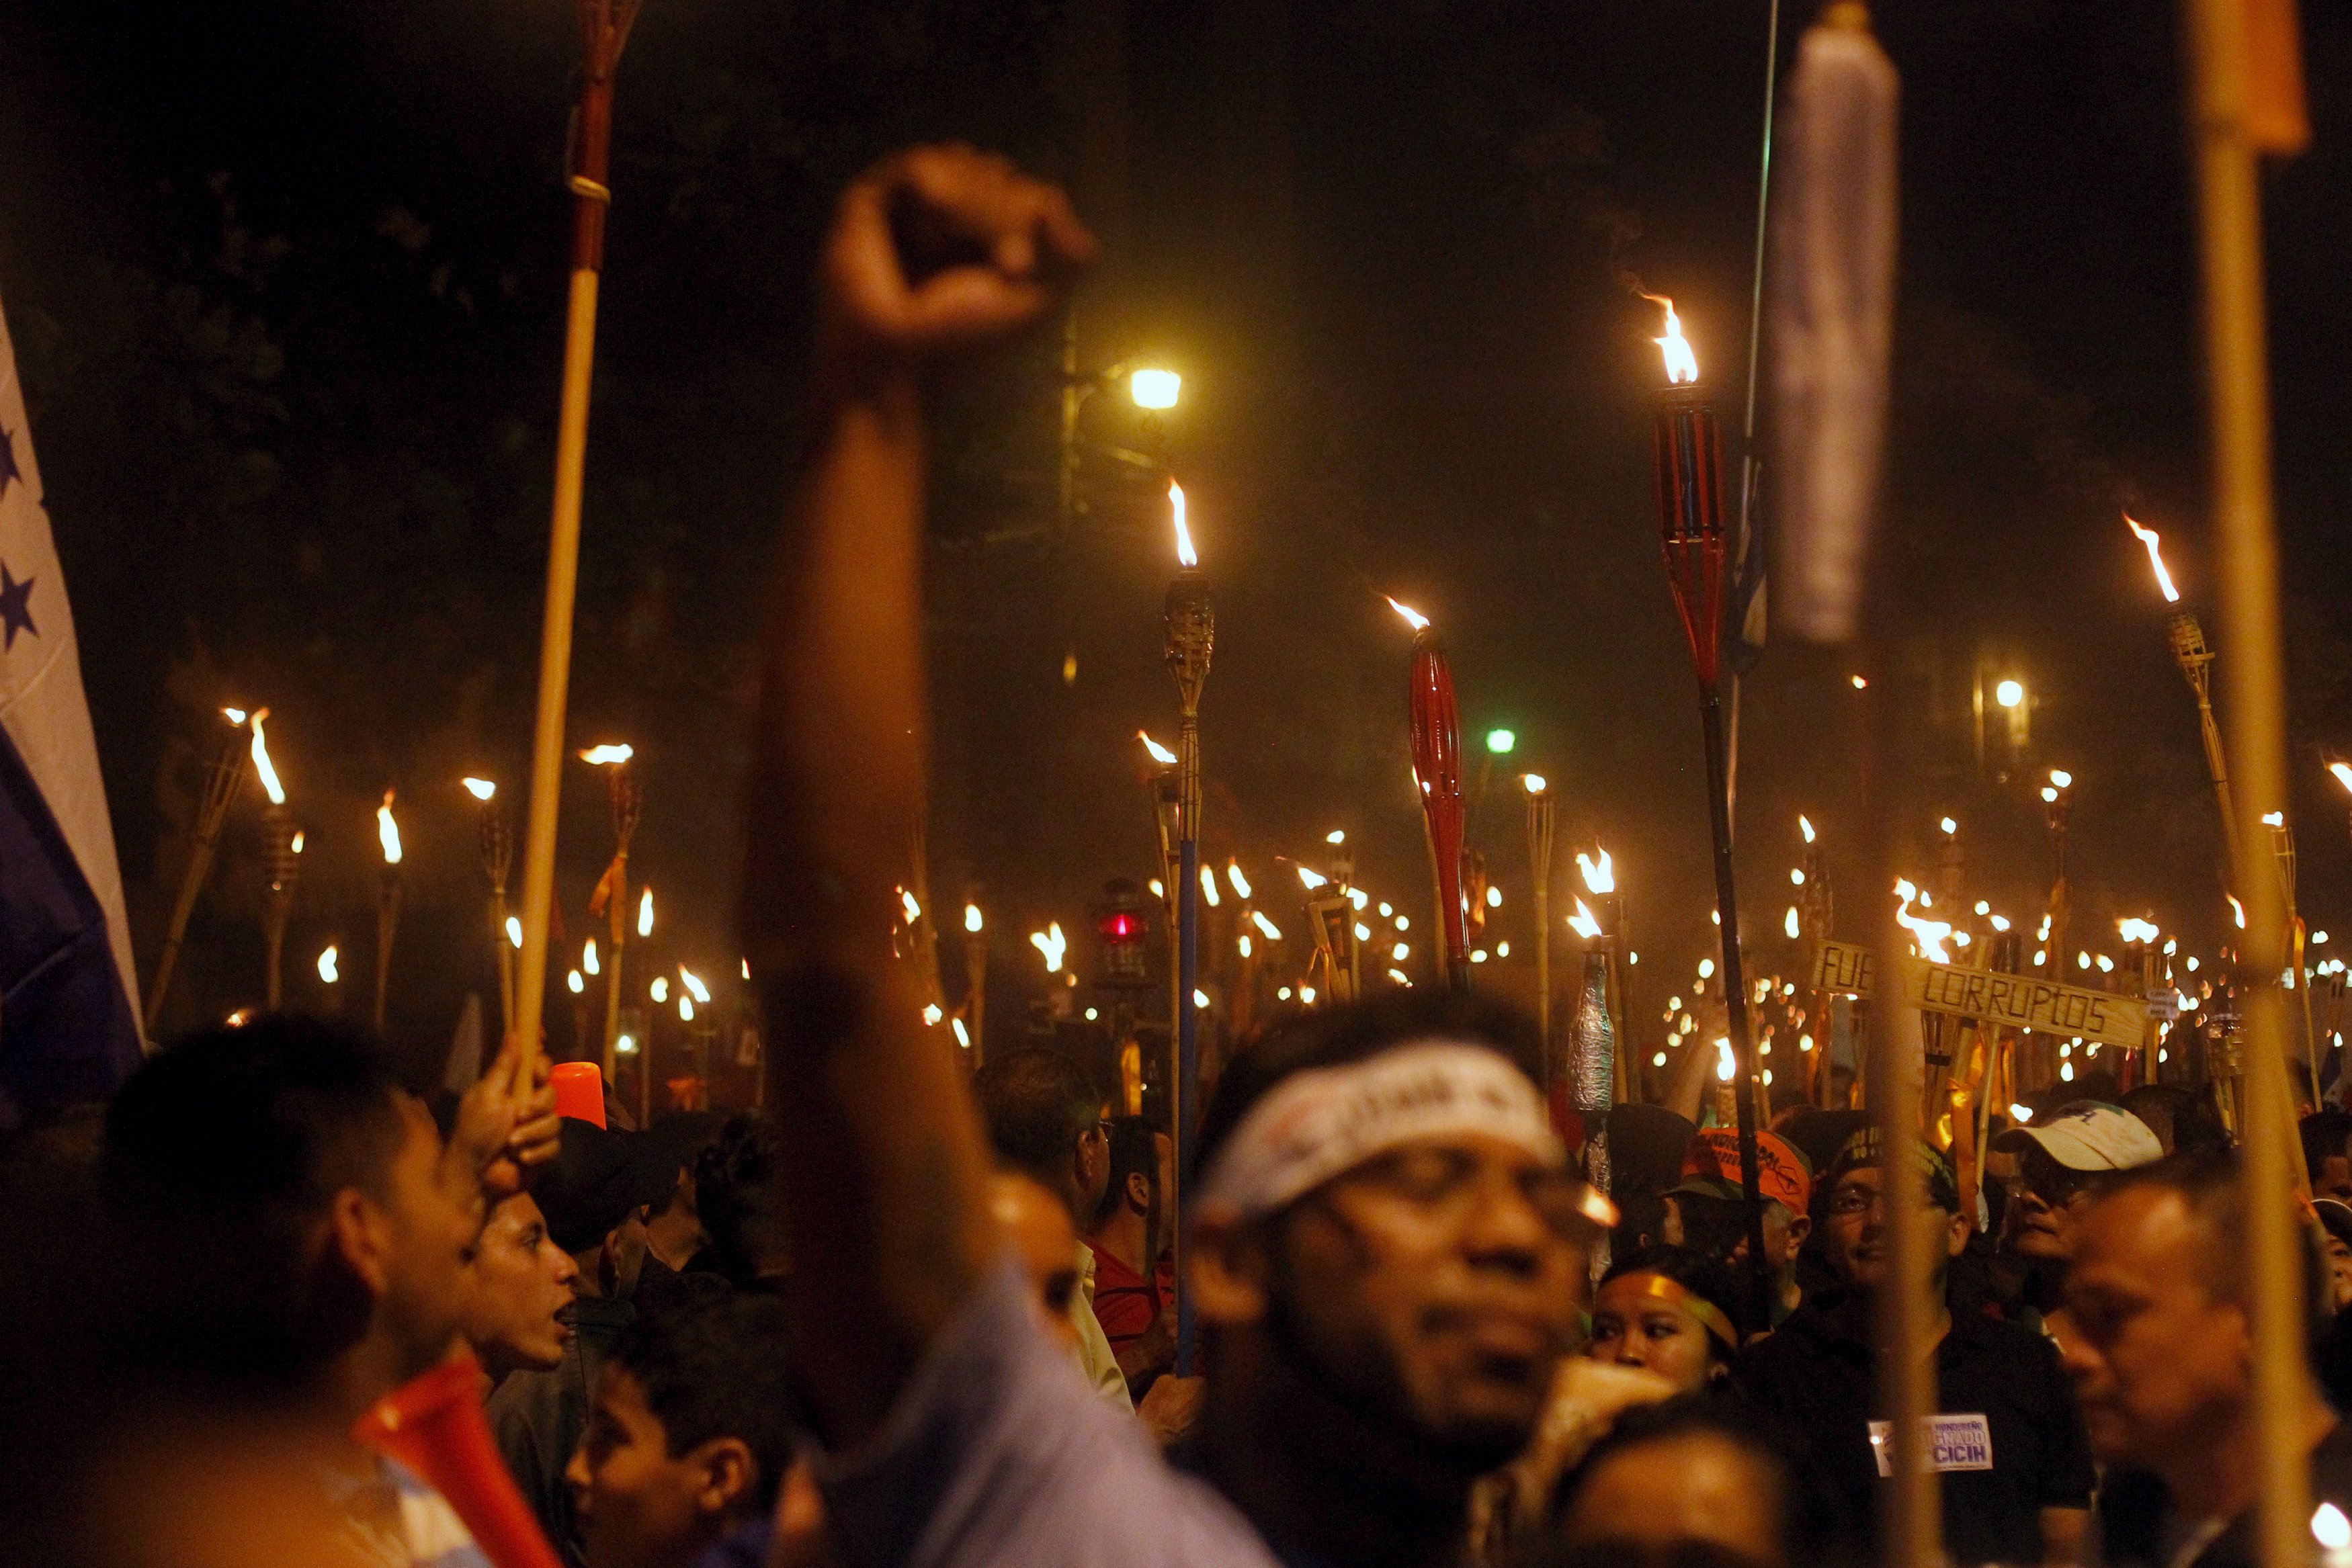 Demonstrators hold torches during a march to demand the resignation of Honduras' President Juan Orlando Hernandez in Tegucigalpa, July 10, 2015